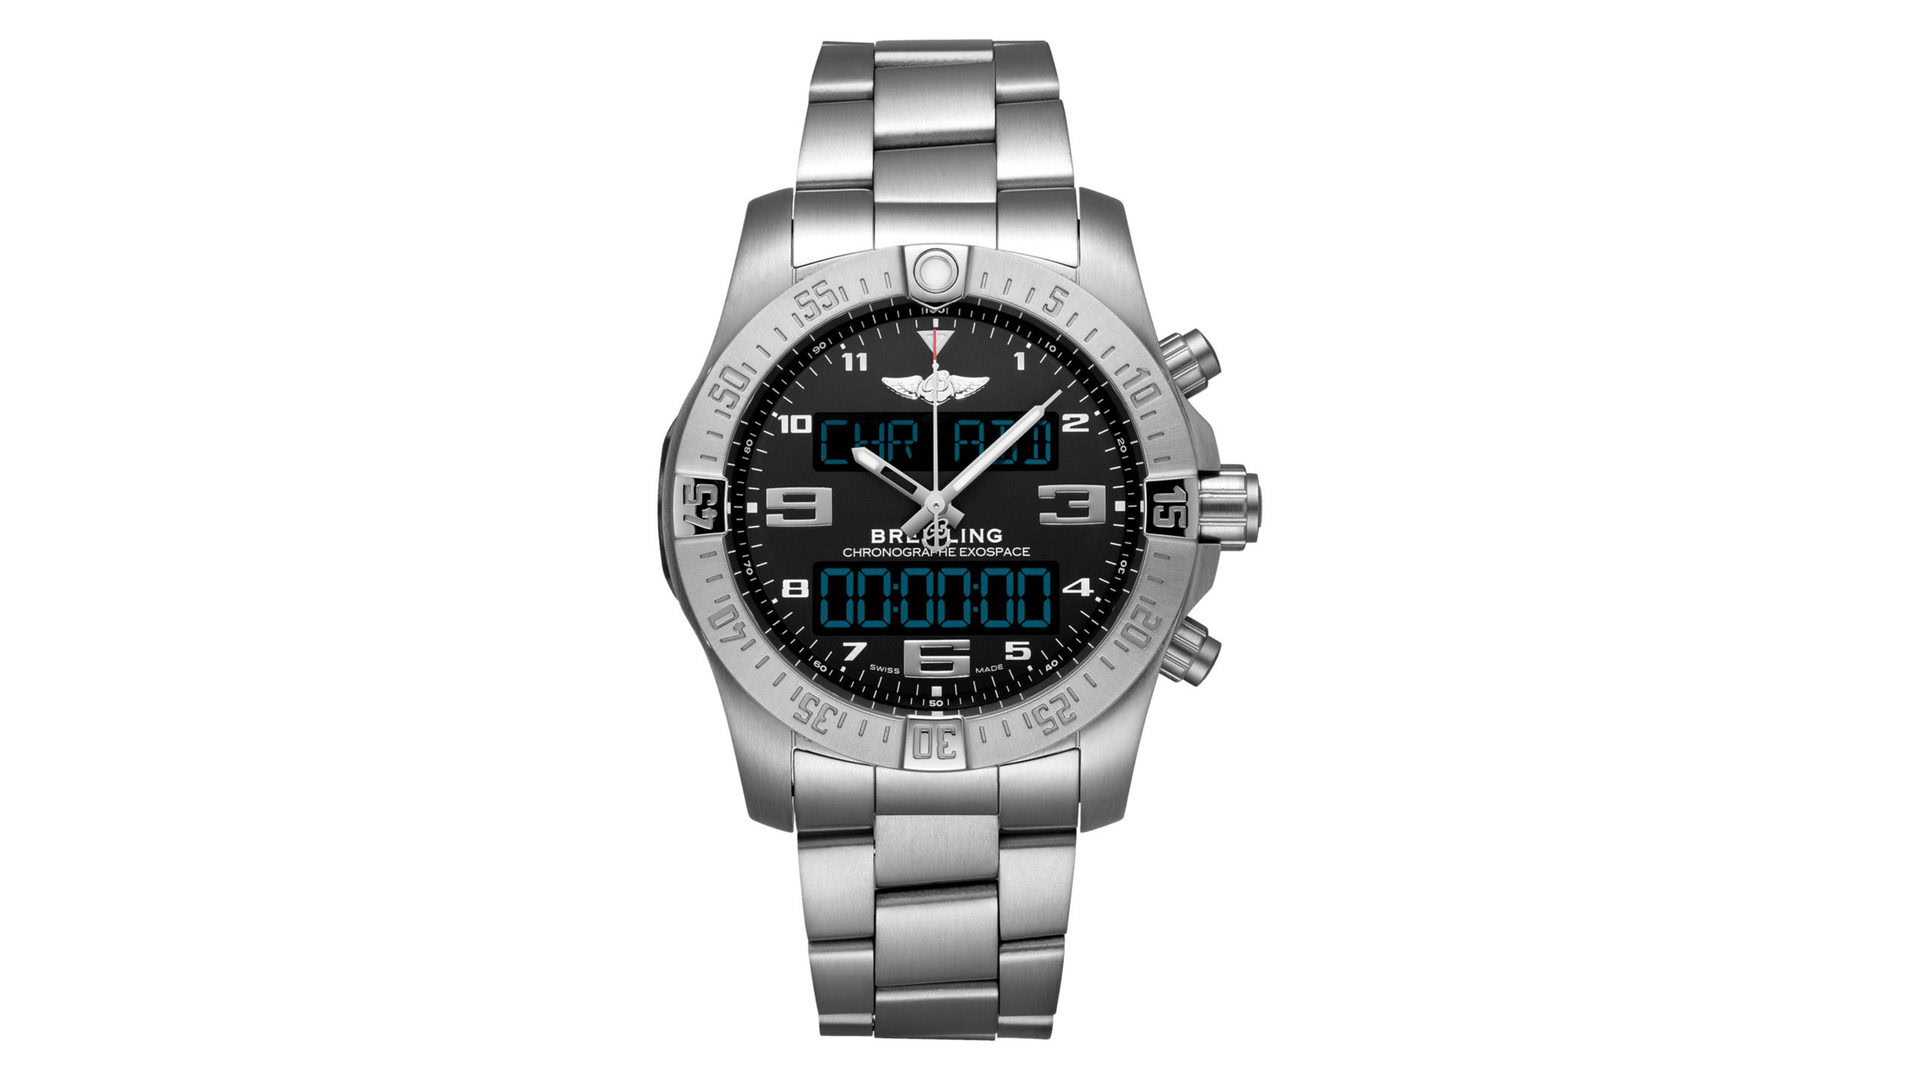 A Breitling Exospace 55 smartwatch with a Titanium band.